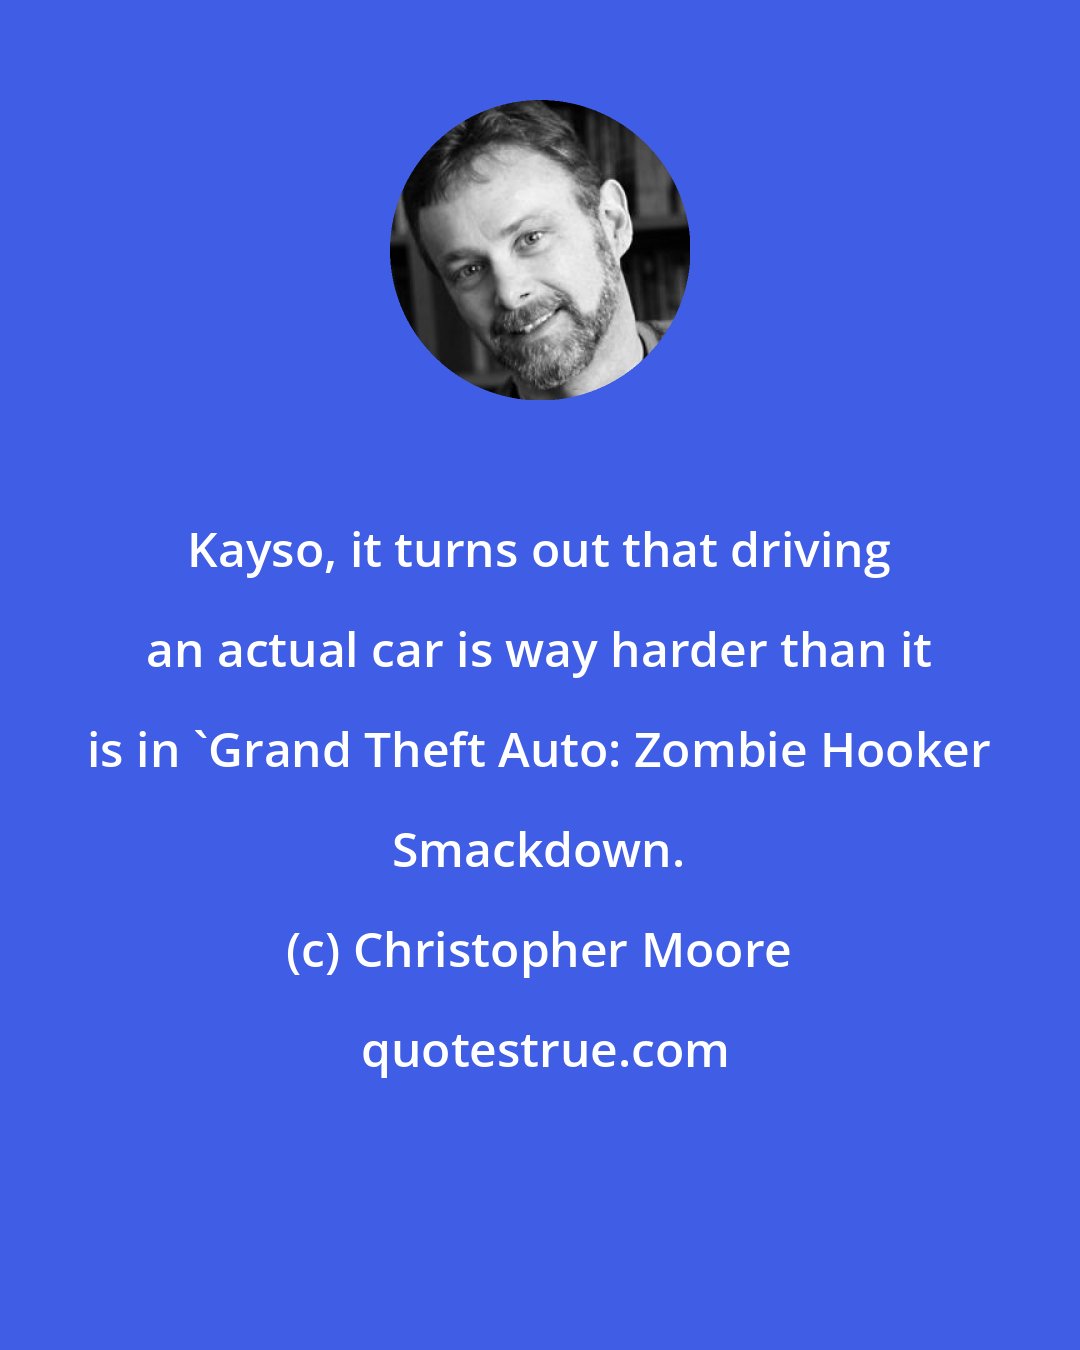 Christopher Moore: Kayso, it turns out that driving an actual car is way harder than it is in 'Grand Theft Auto: Zombie Hooker Smackdown.